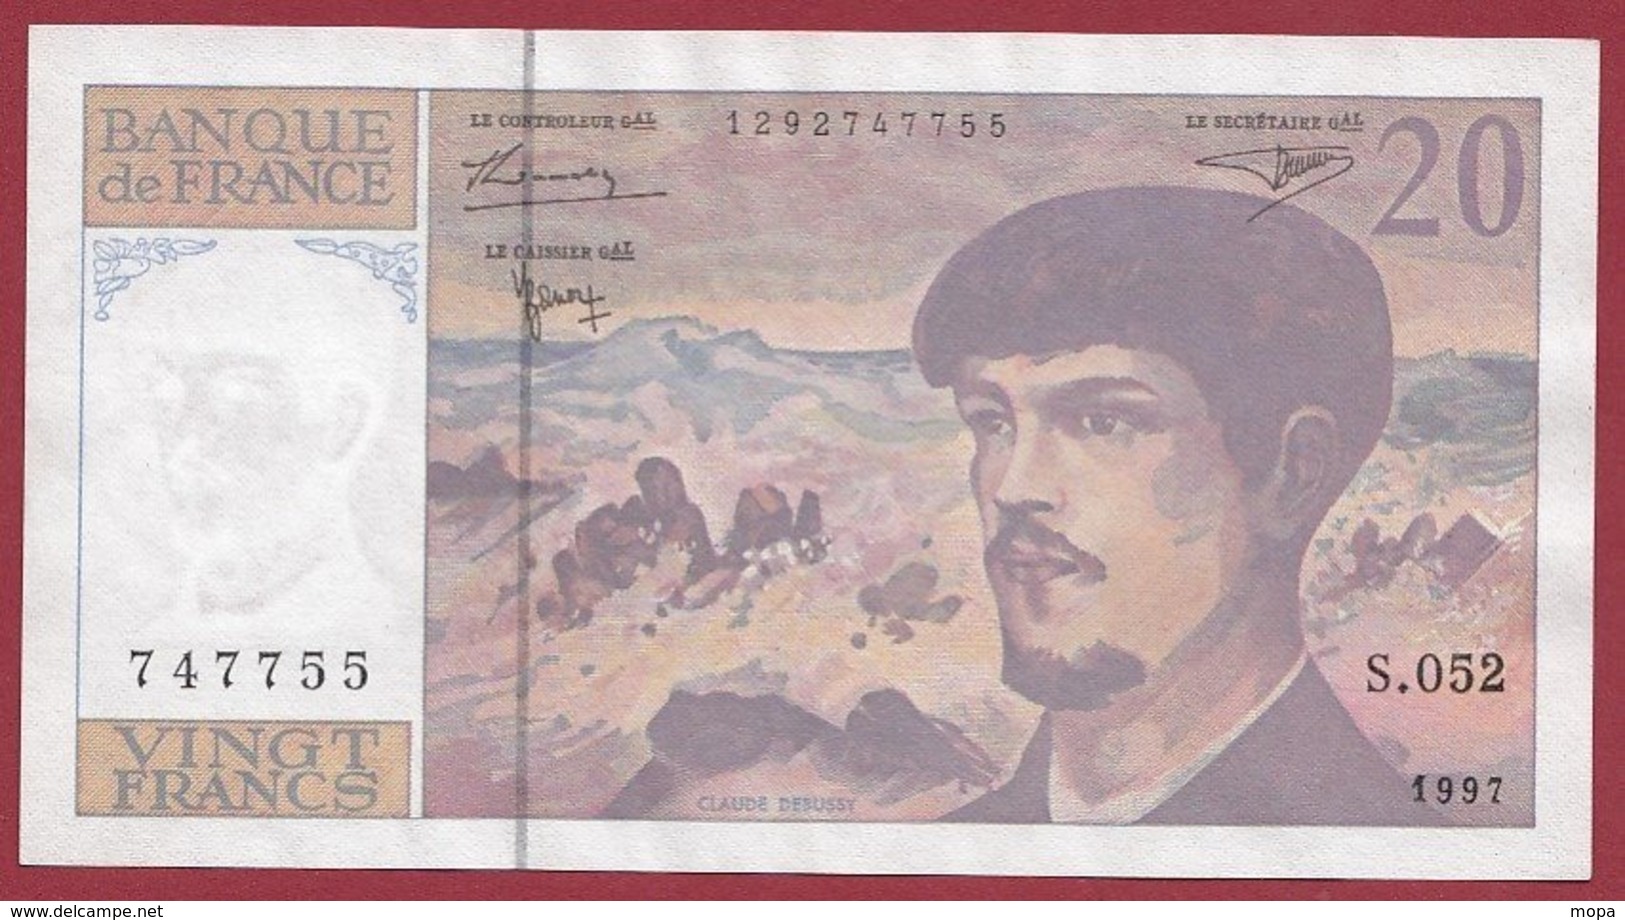 20 Francs "Debussy" 1997 ---VF/SUP----Série -S.052 - 20 F 1980-1997 ''Debussy''